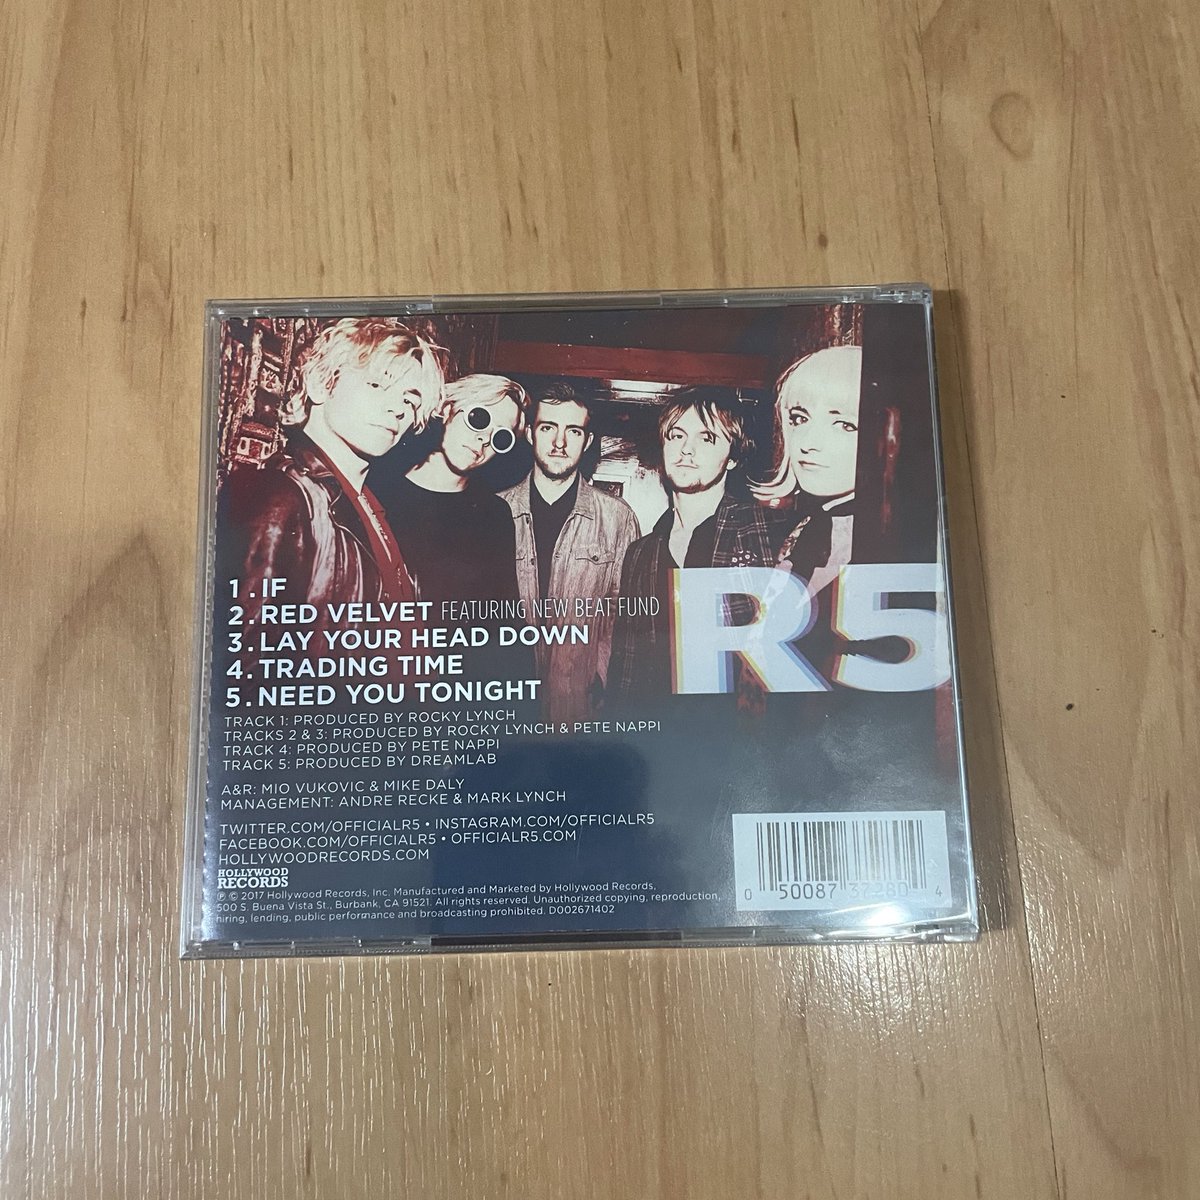 💕R5 new addictions cd giveaway💕

i have an extra cd from the new addictions tour (still sealed), so i wanted to give it away to someone!! 

all you have to do is:
- follow me
- like and retweet

it’s international and a winner will be chosen on 6/14 good luck 😙